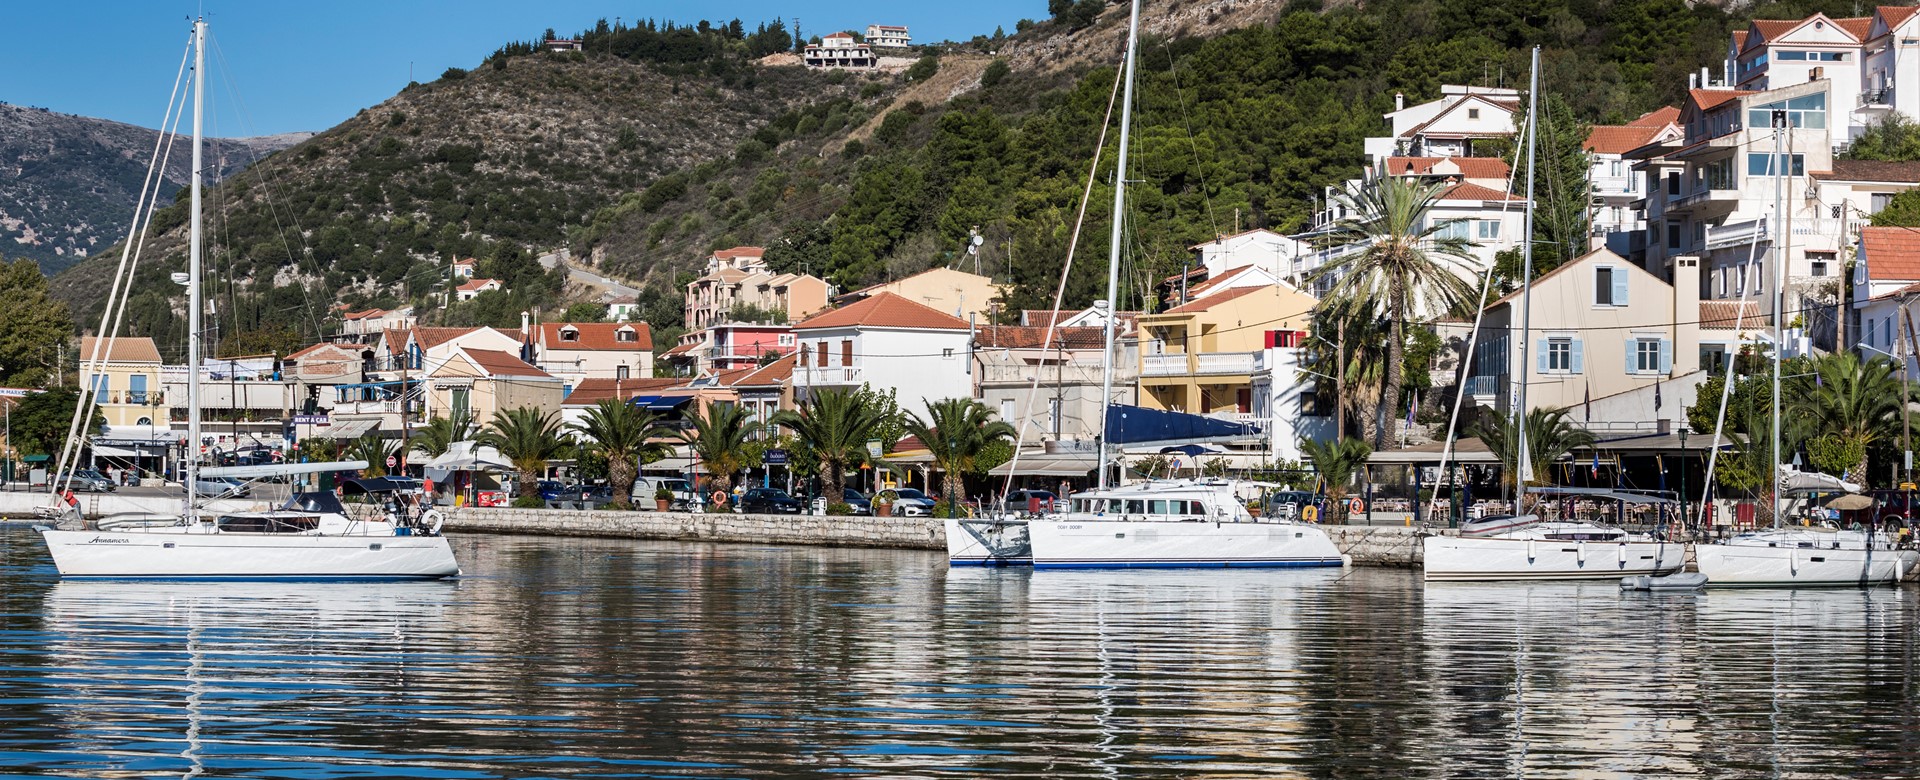 Looking back to Palm House Harbourfront Mansion from the harbour of Agia Efimia, Kefalonia, Greek Islands